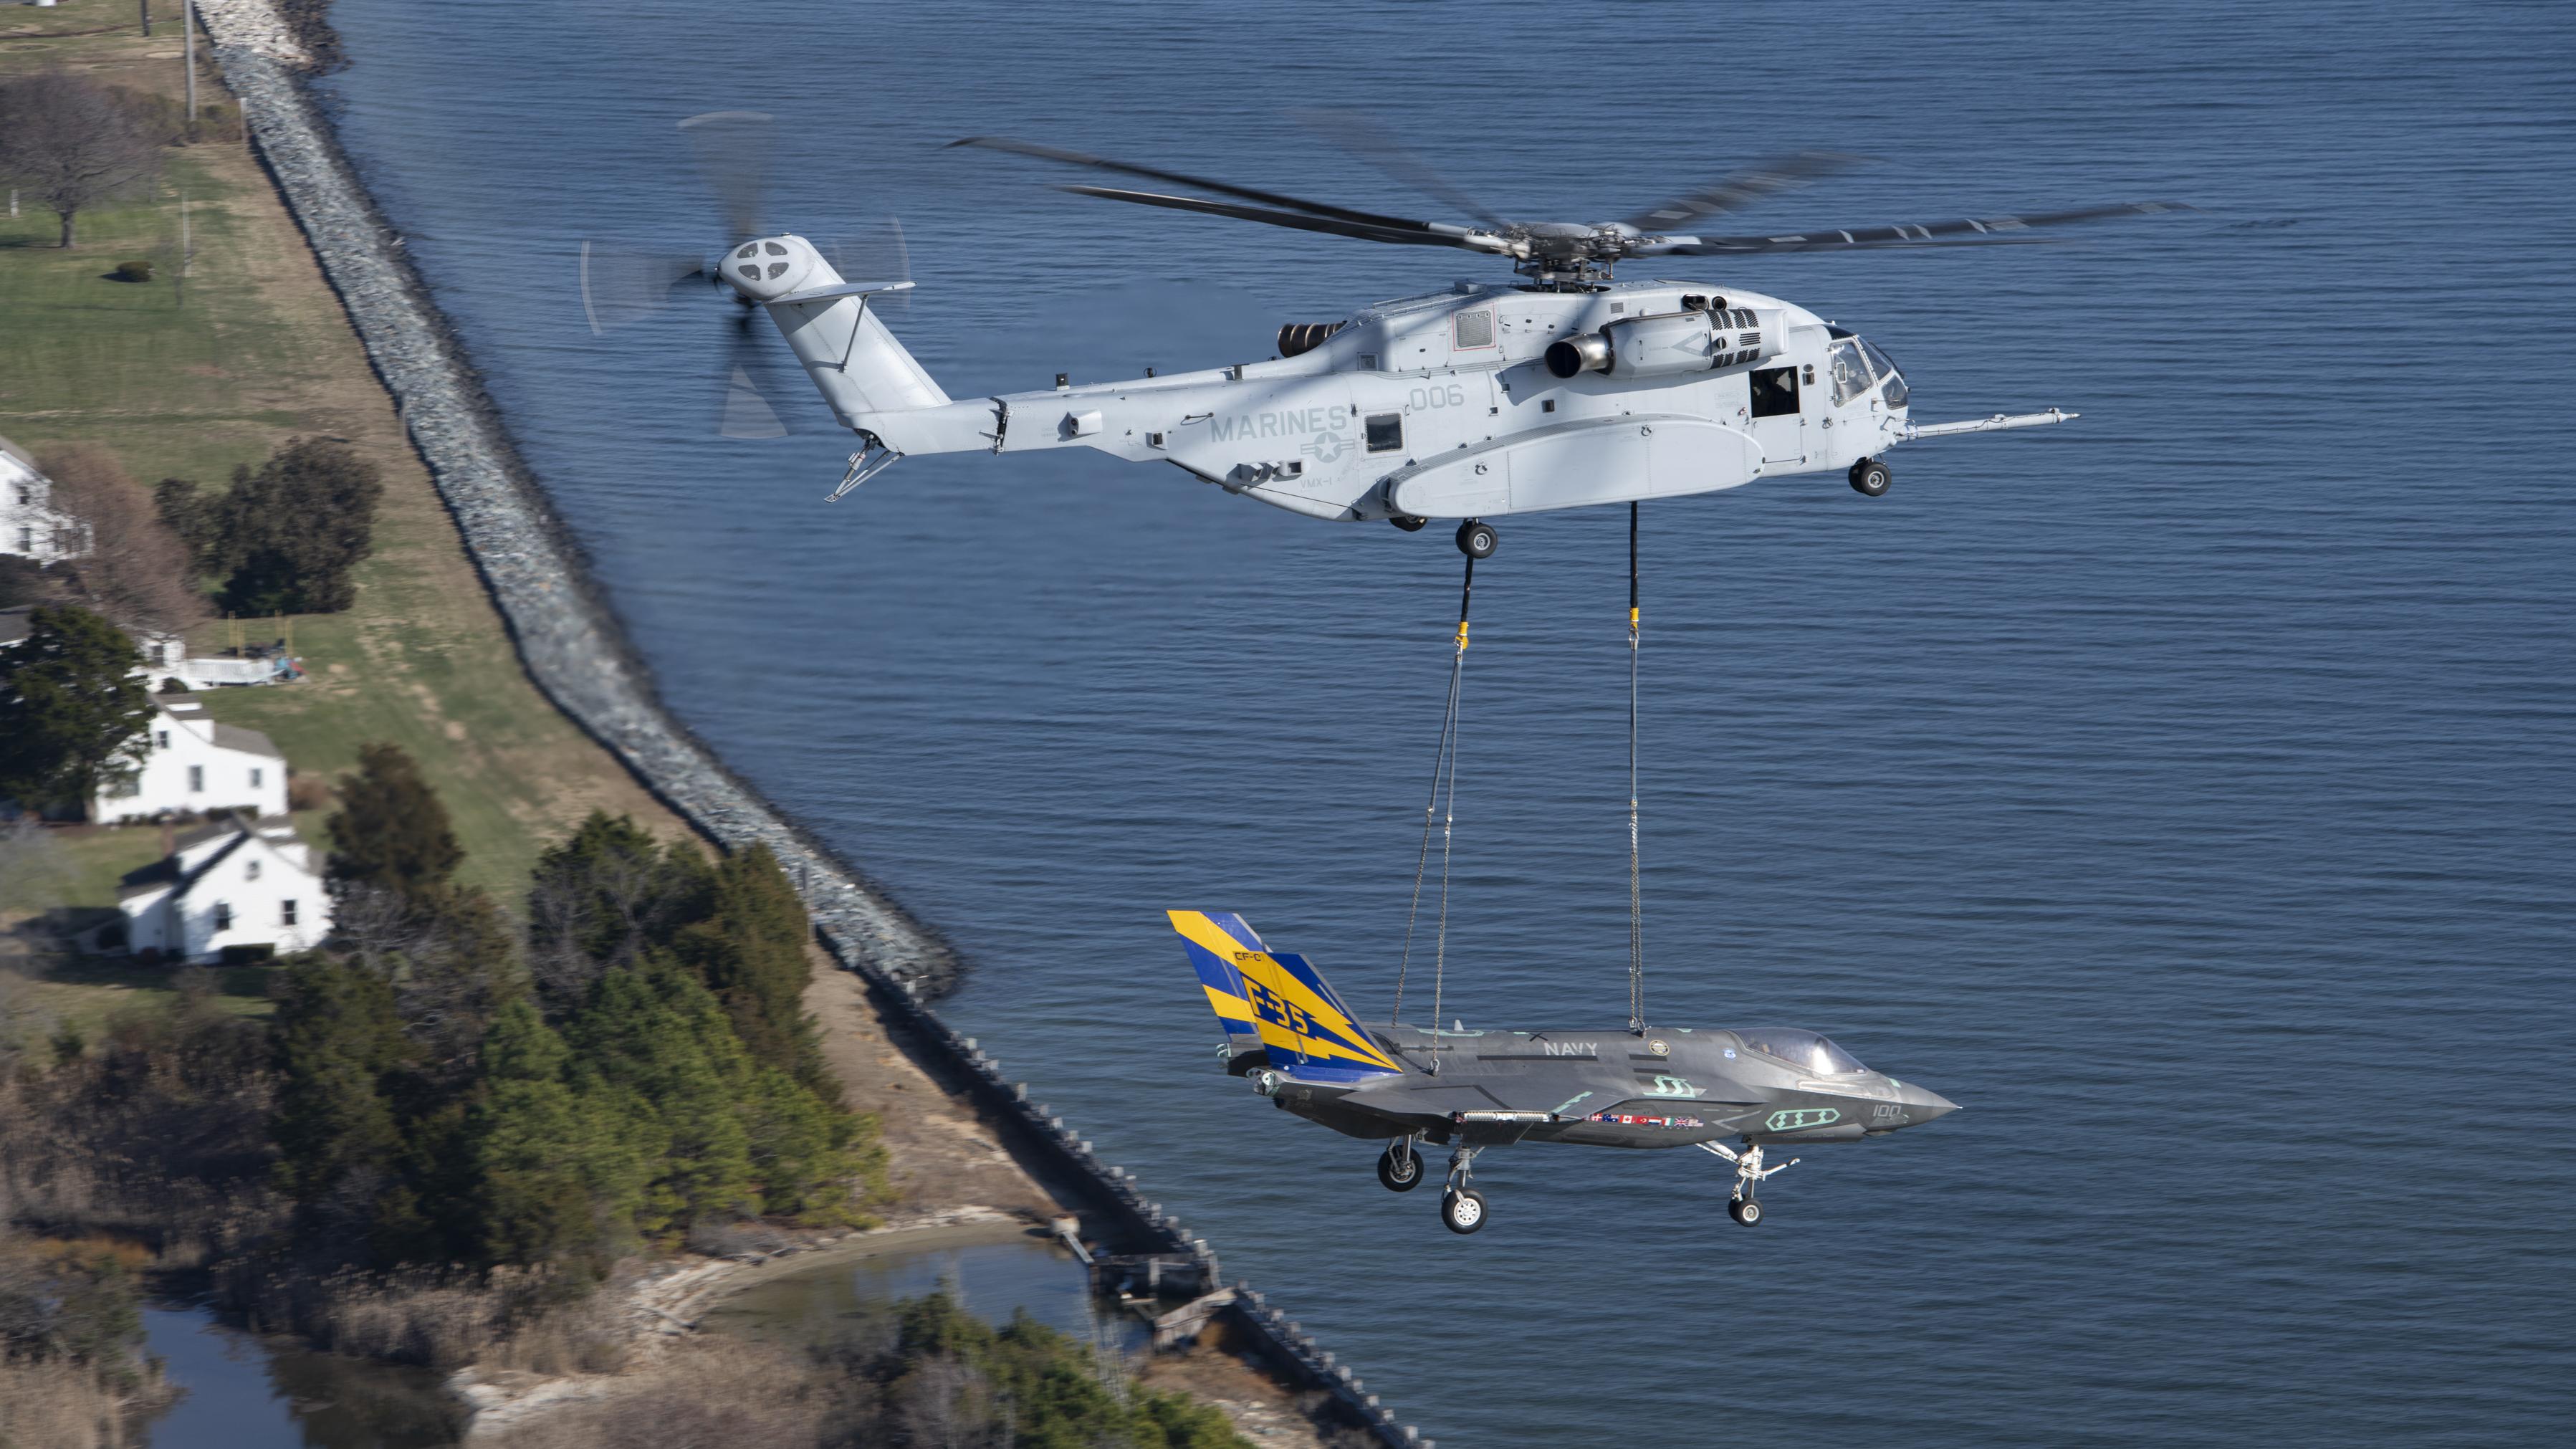 A non-flyable F-35C Lightning II airframe is flown as part of a CH-53K King Stallion external load certification lift Dec. 13, 2022, at Naval Air Station Patuxent River, Md.